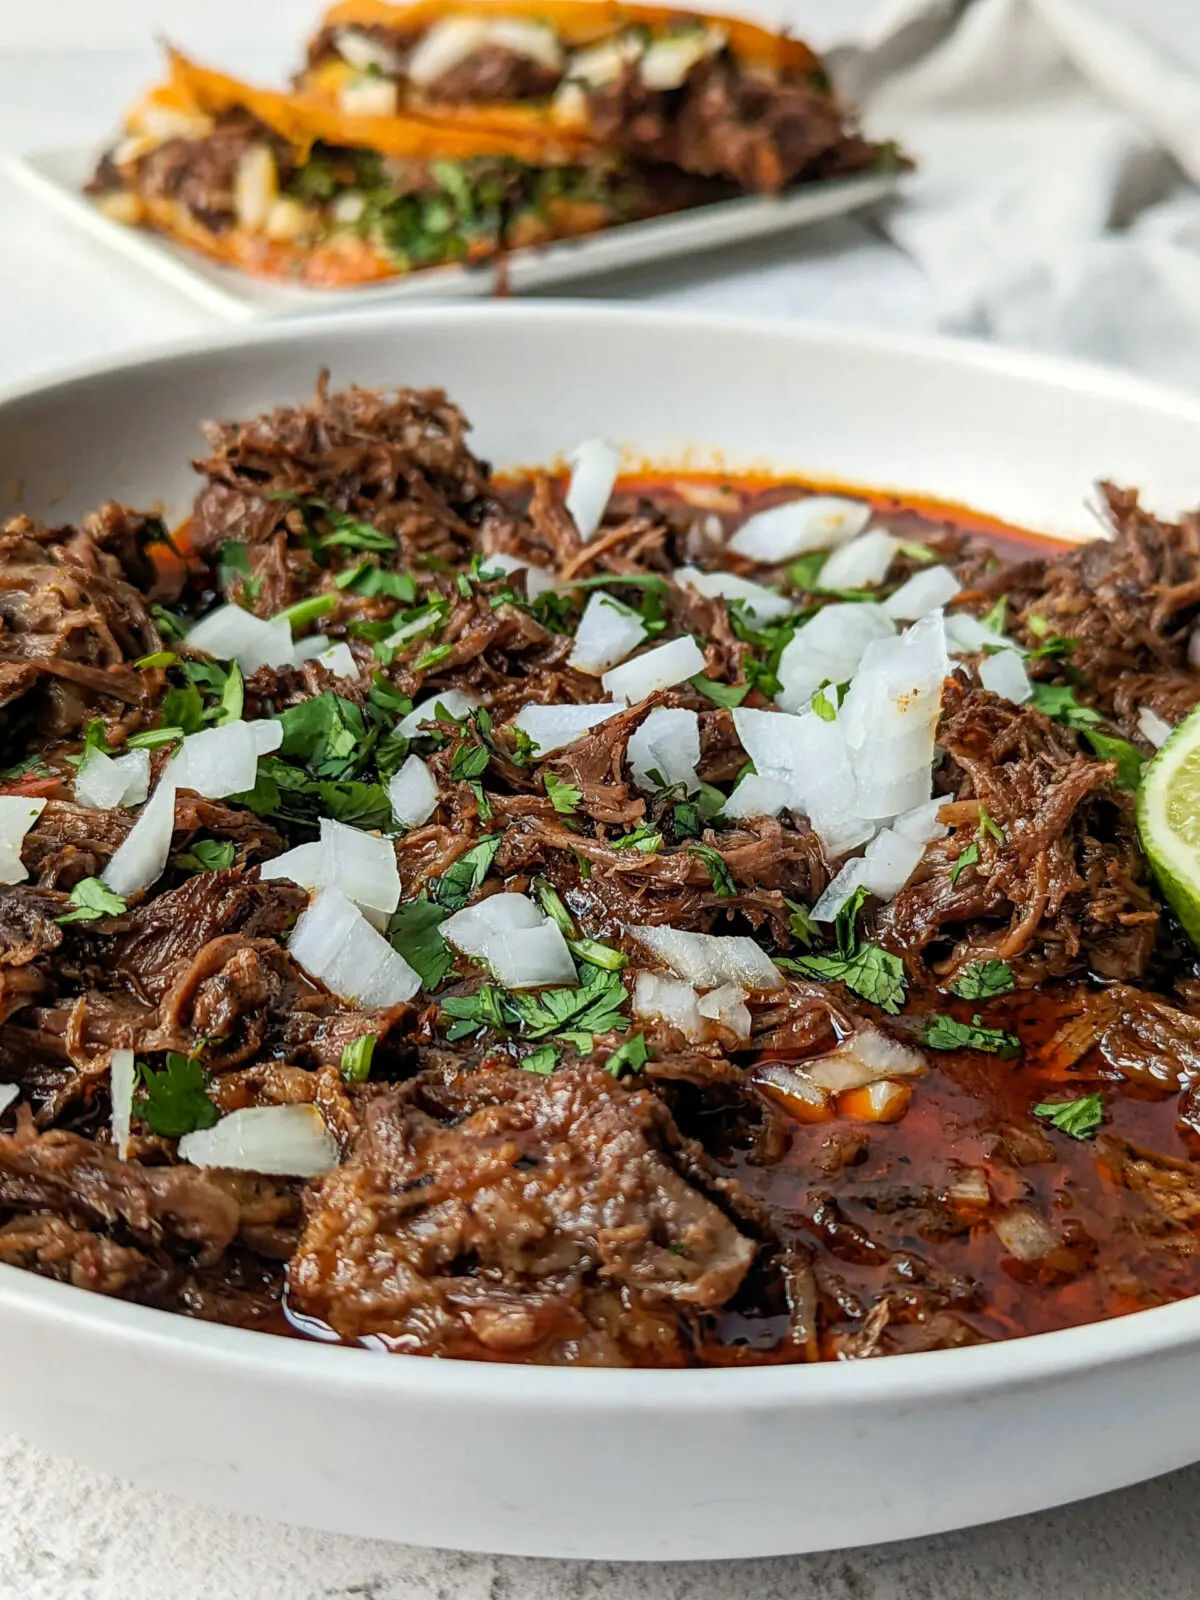 A bowl of birria con consome garnished with onion and cilantro with birria tacos in the background.